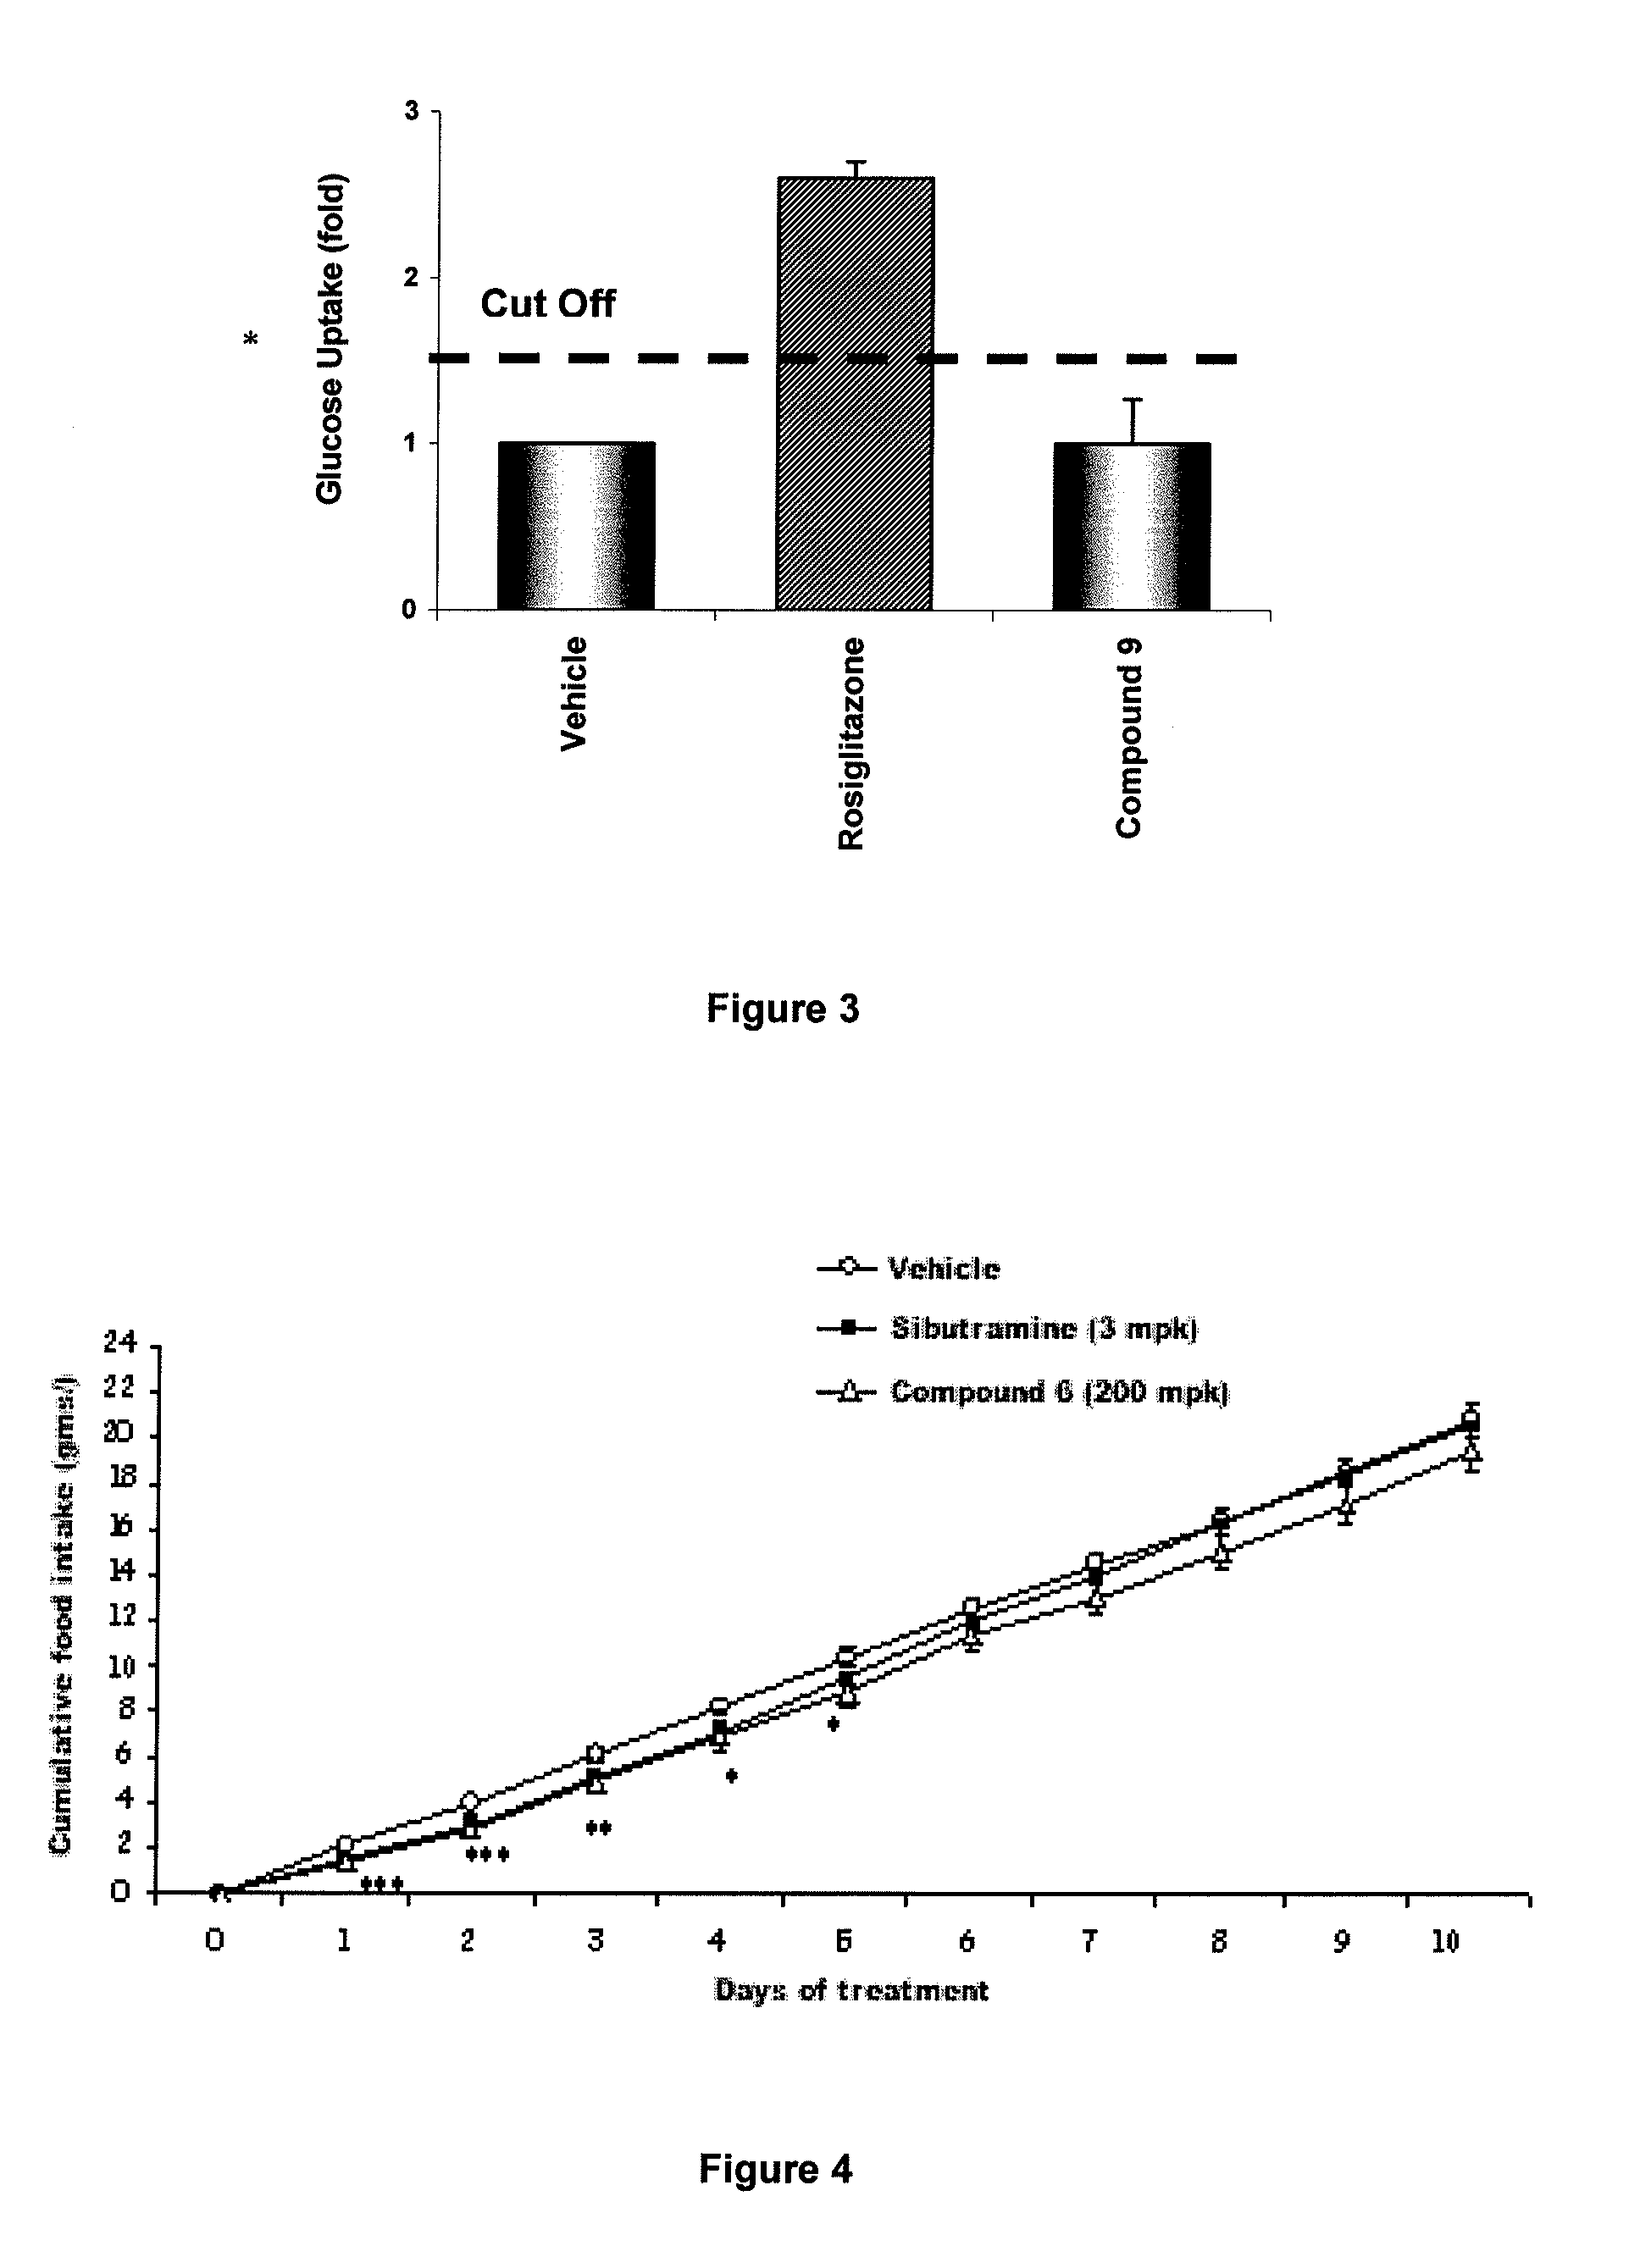 Method for identifying compounds that act as insulin-sensitizers